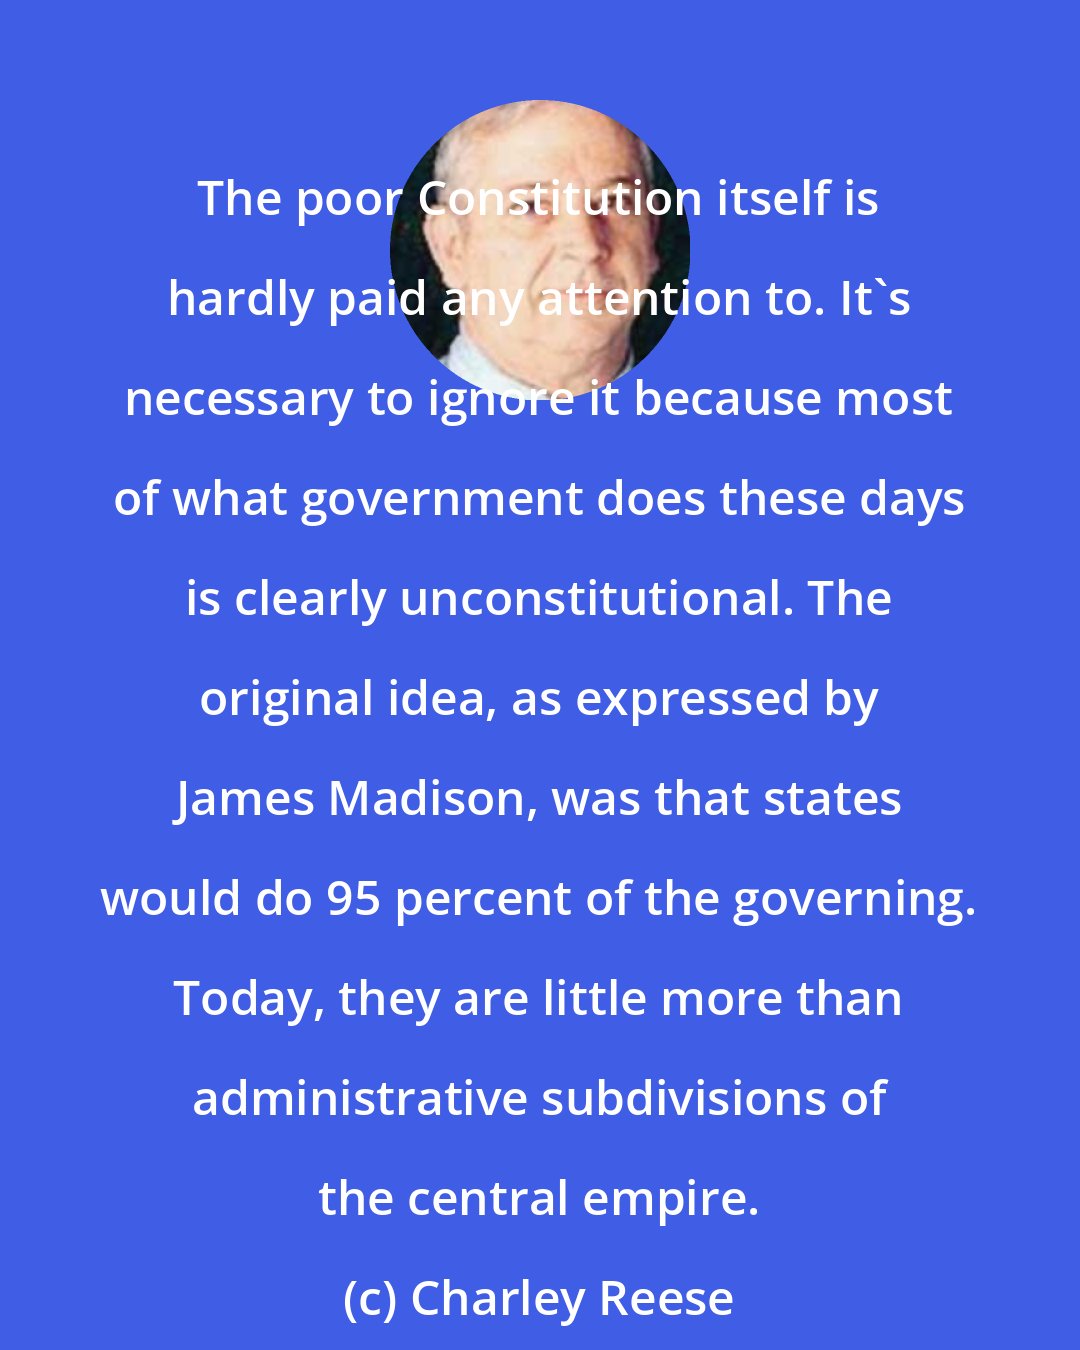 Charley Reese: The poor Constitution itself is hardly paid any attention to. It's necessary to ignore it because most of what government does these days is clearly unconstitutional. The original idea, as expressed by James Madison, was that states would do 95 percent of the governing. Today, they are little more than administrative subdivisions of the central empire.